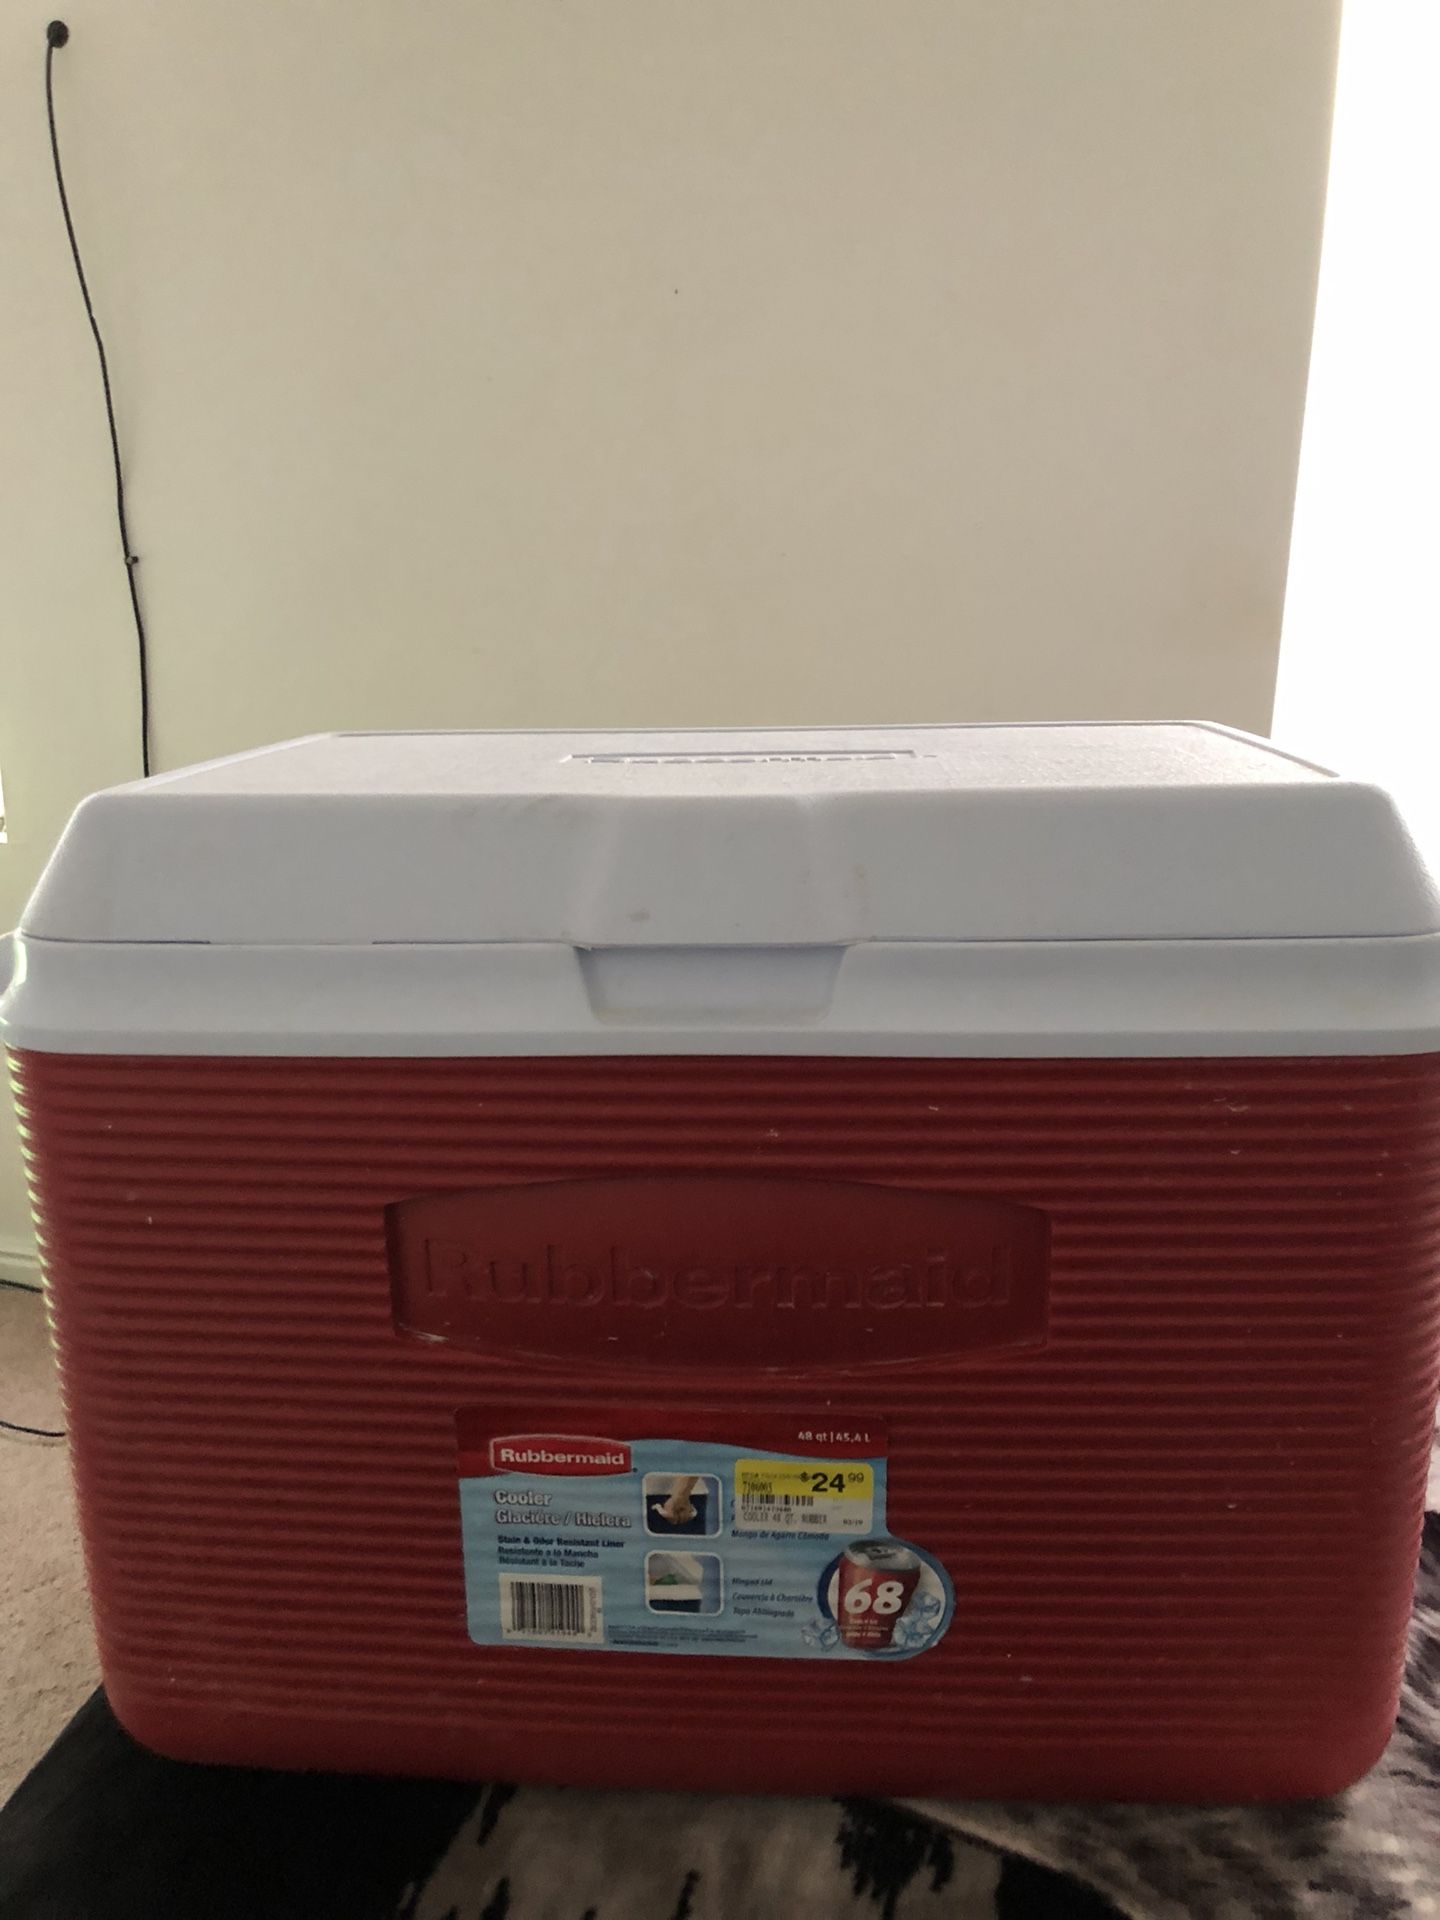 Ice cooler rubbermaid